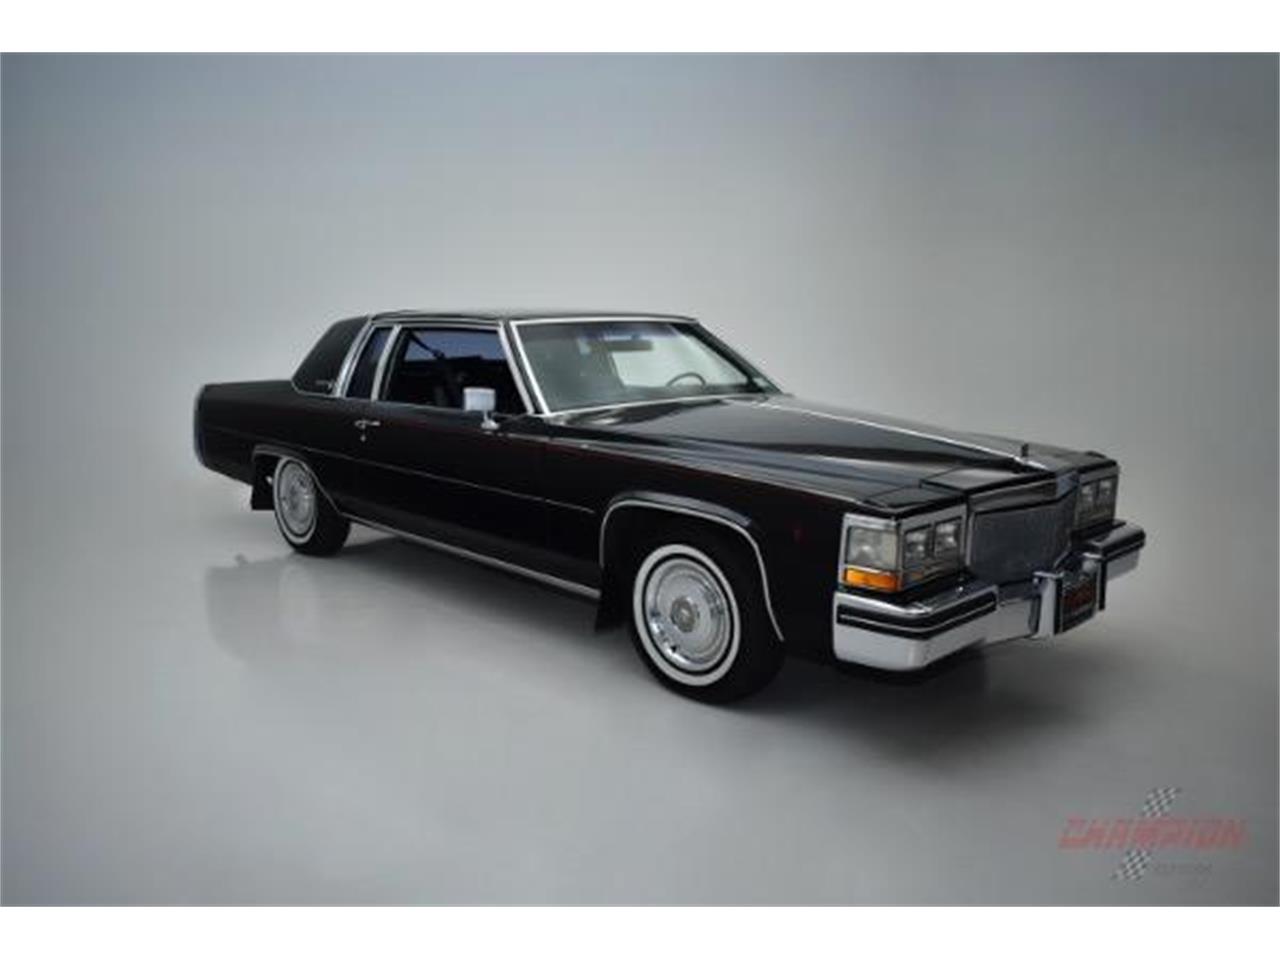 1984 cadillac coupe deville for sale classiccars com cc 1056862 1984 cadillac coupe deville for sale